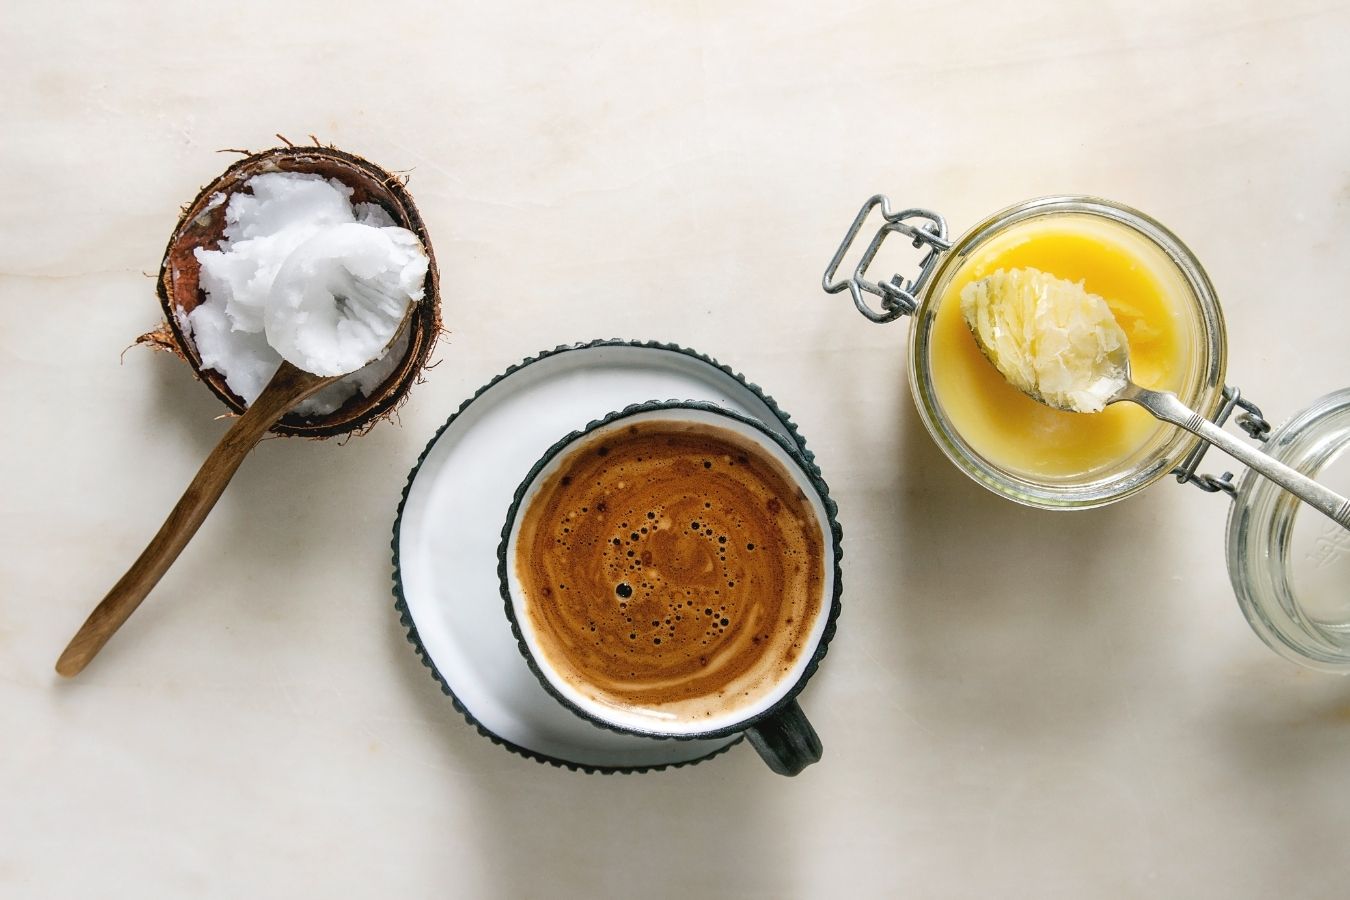 Buttered Coffee, What's All The Fuzz About, Is It Good For Weight Loss And Healthy?